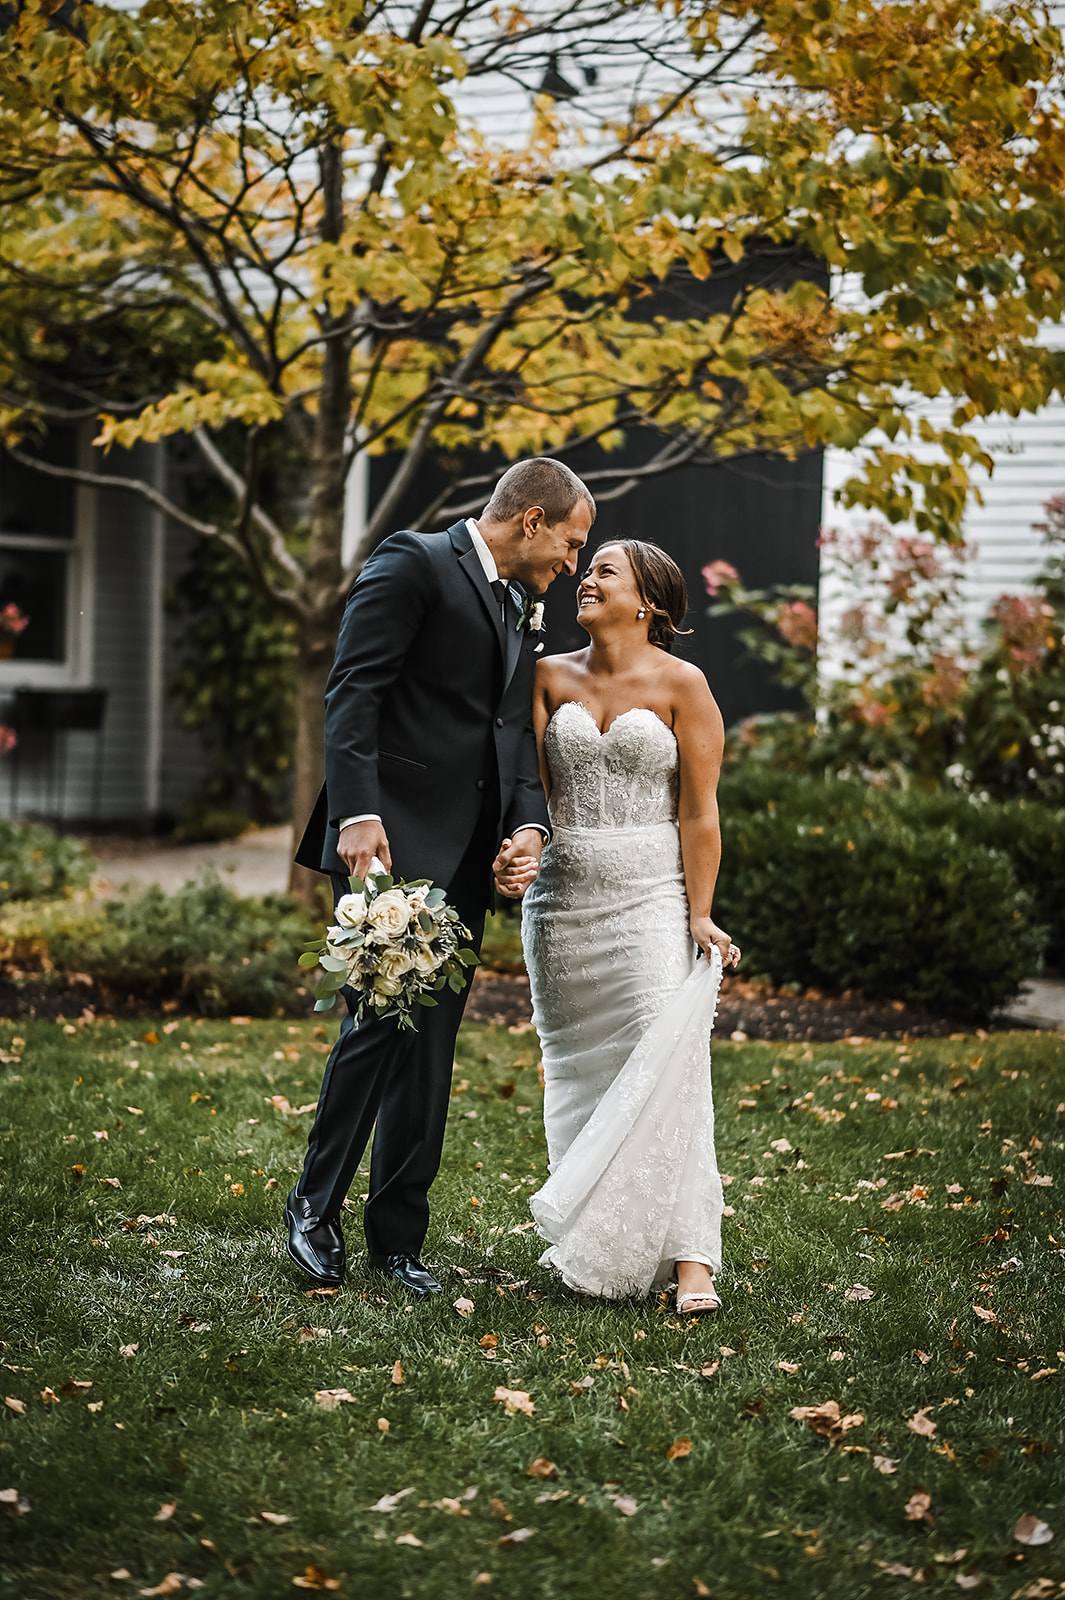 Courtney and Jacob were married at the beautiful Barn on Walnut Hill in Yarmouth, Maine. Their October wedding was so st